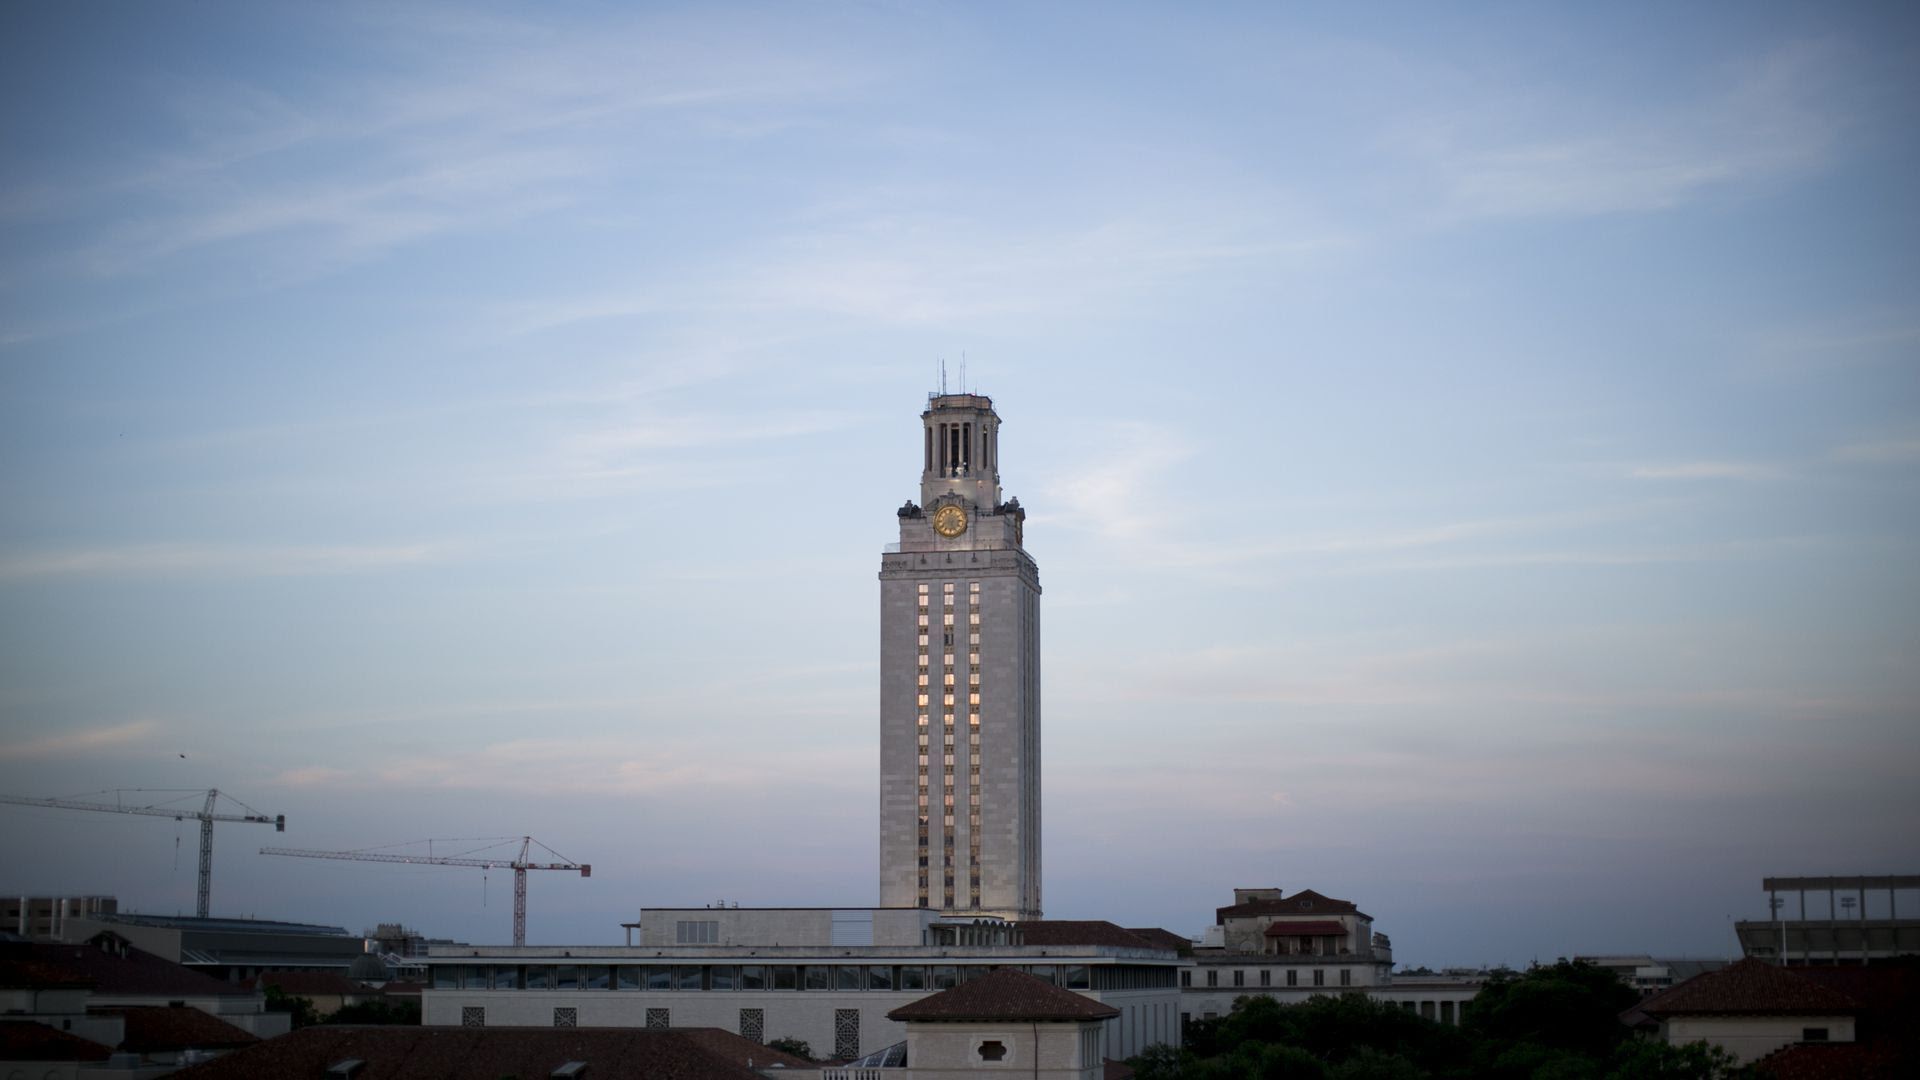 The University of Texas tower